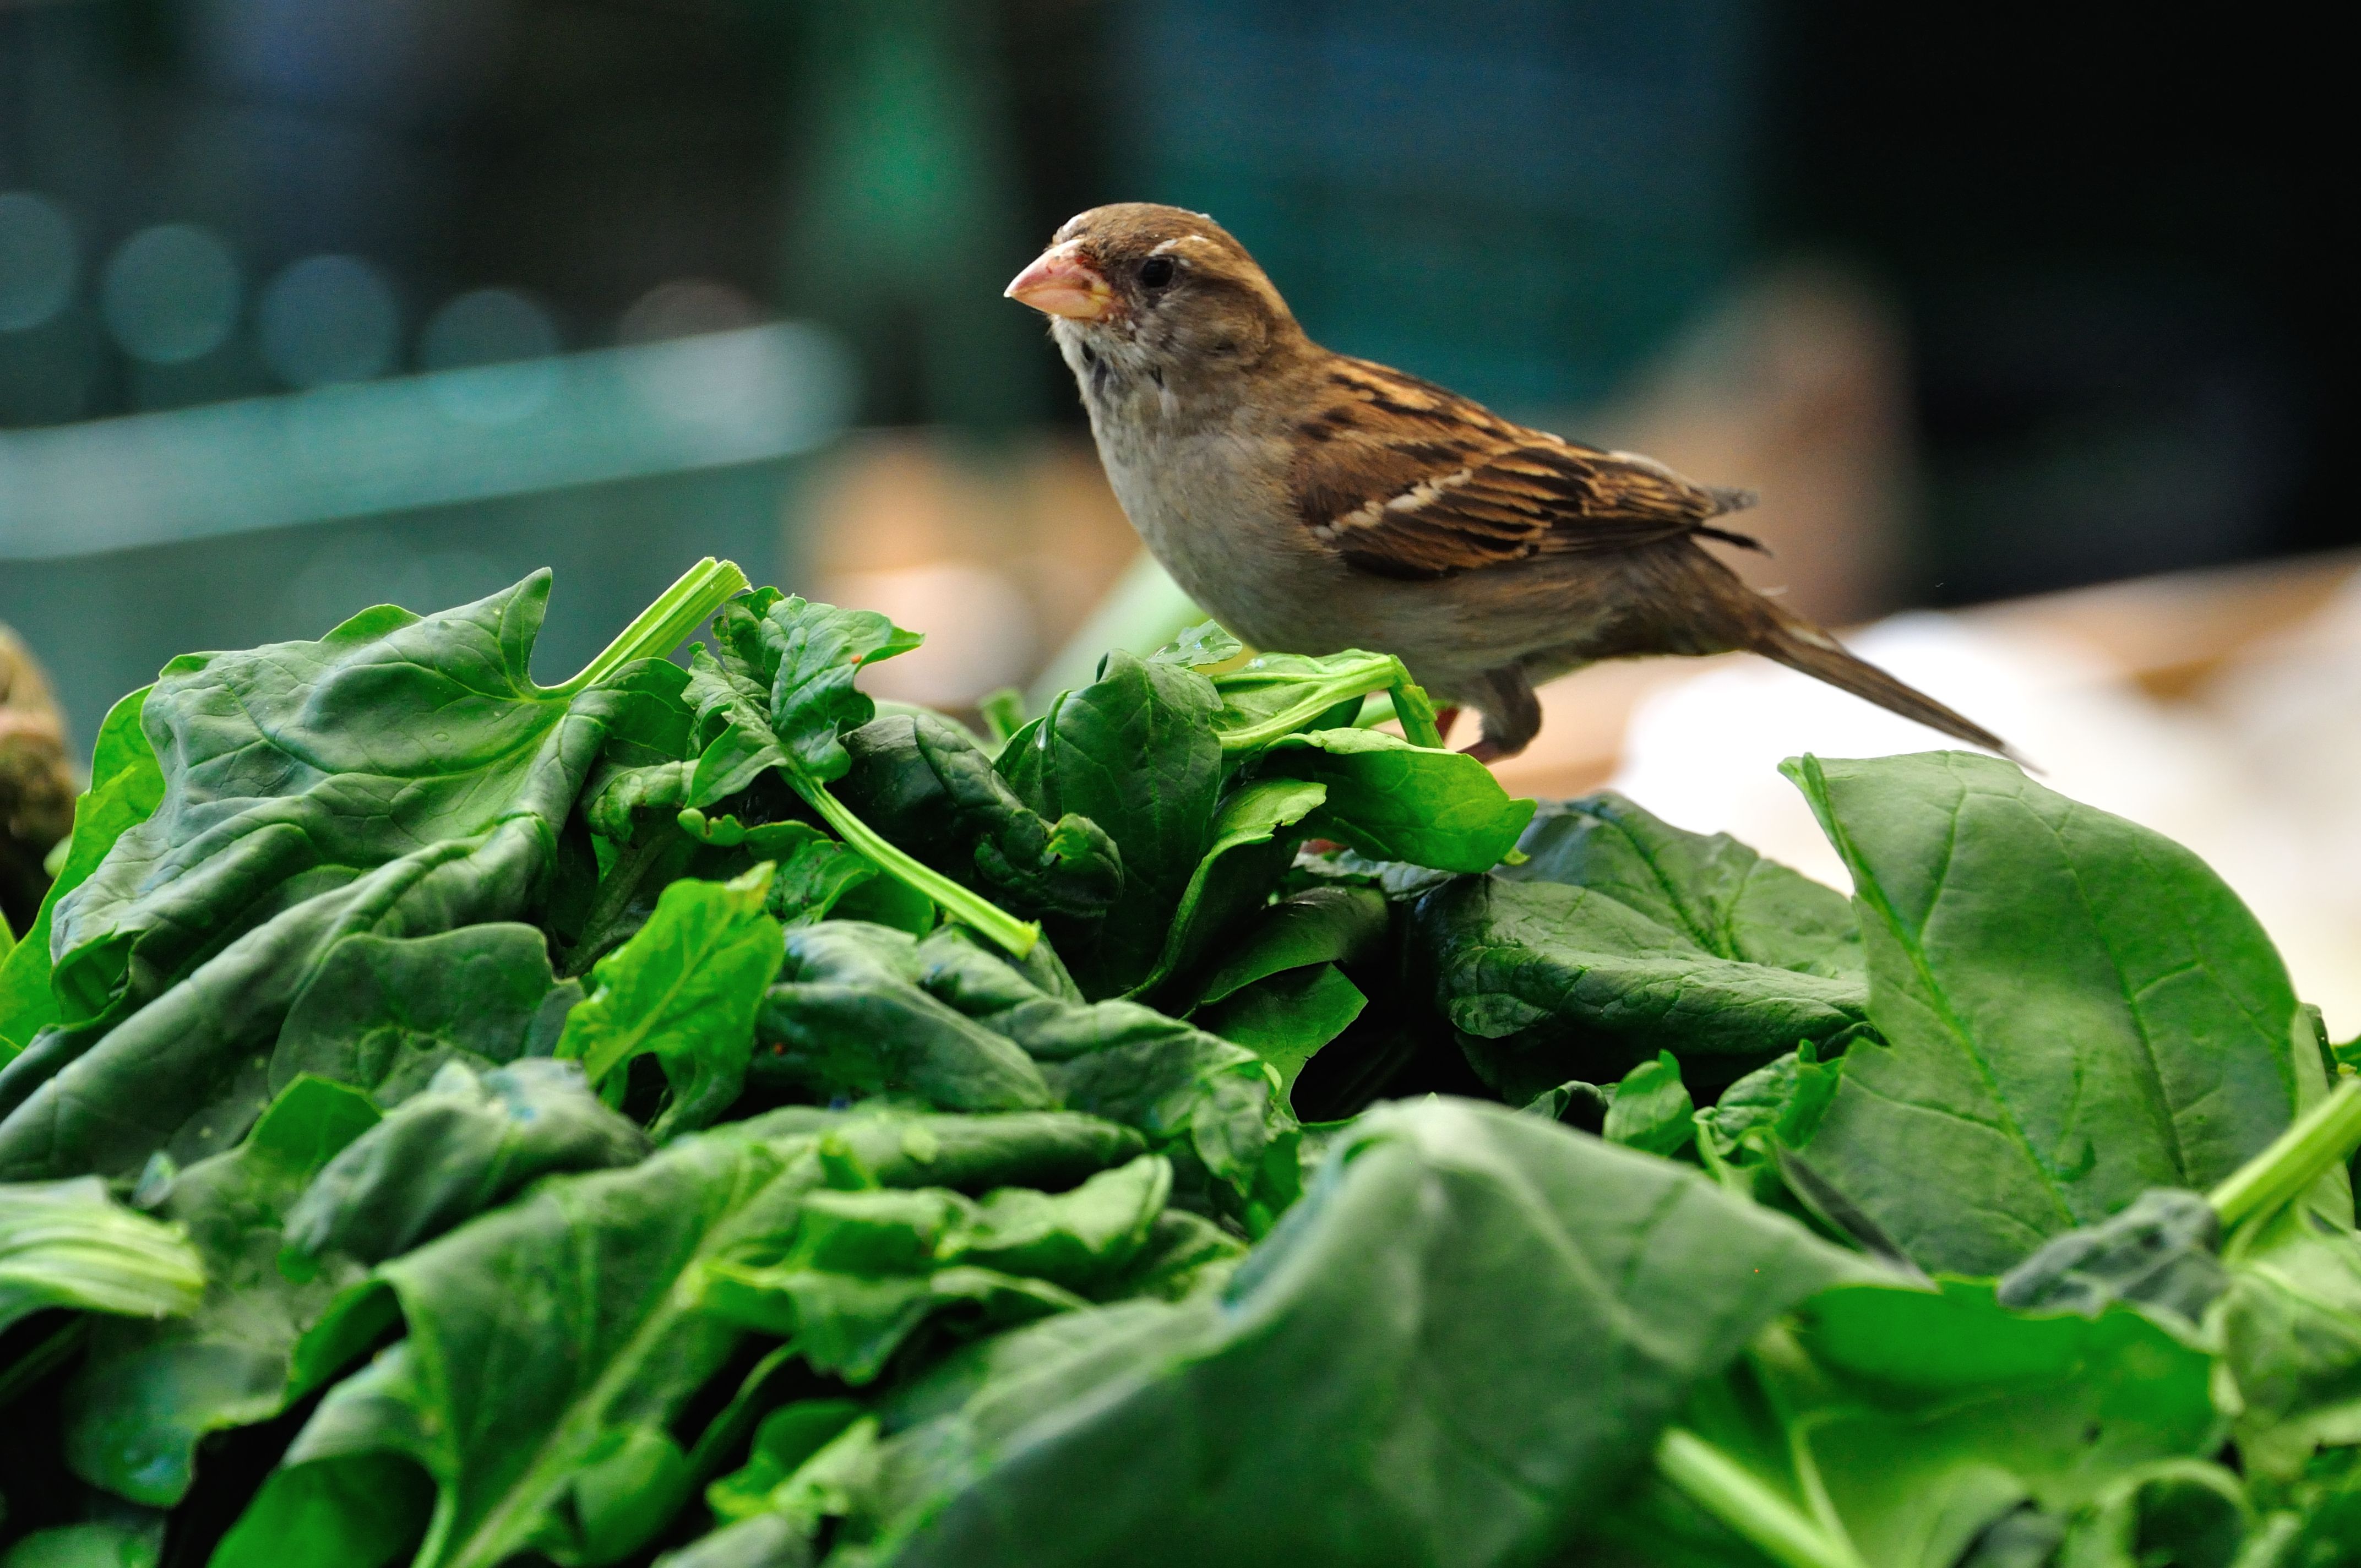 A sparrow contemplating a pile of spinach